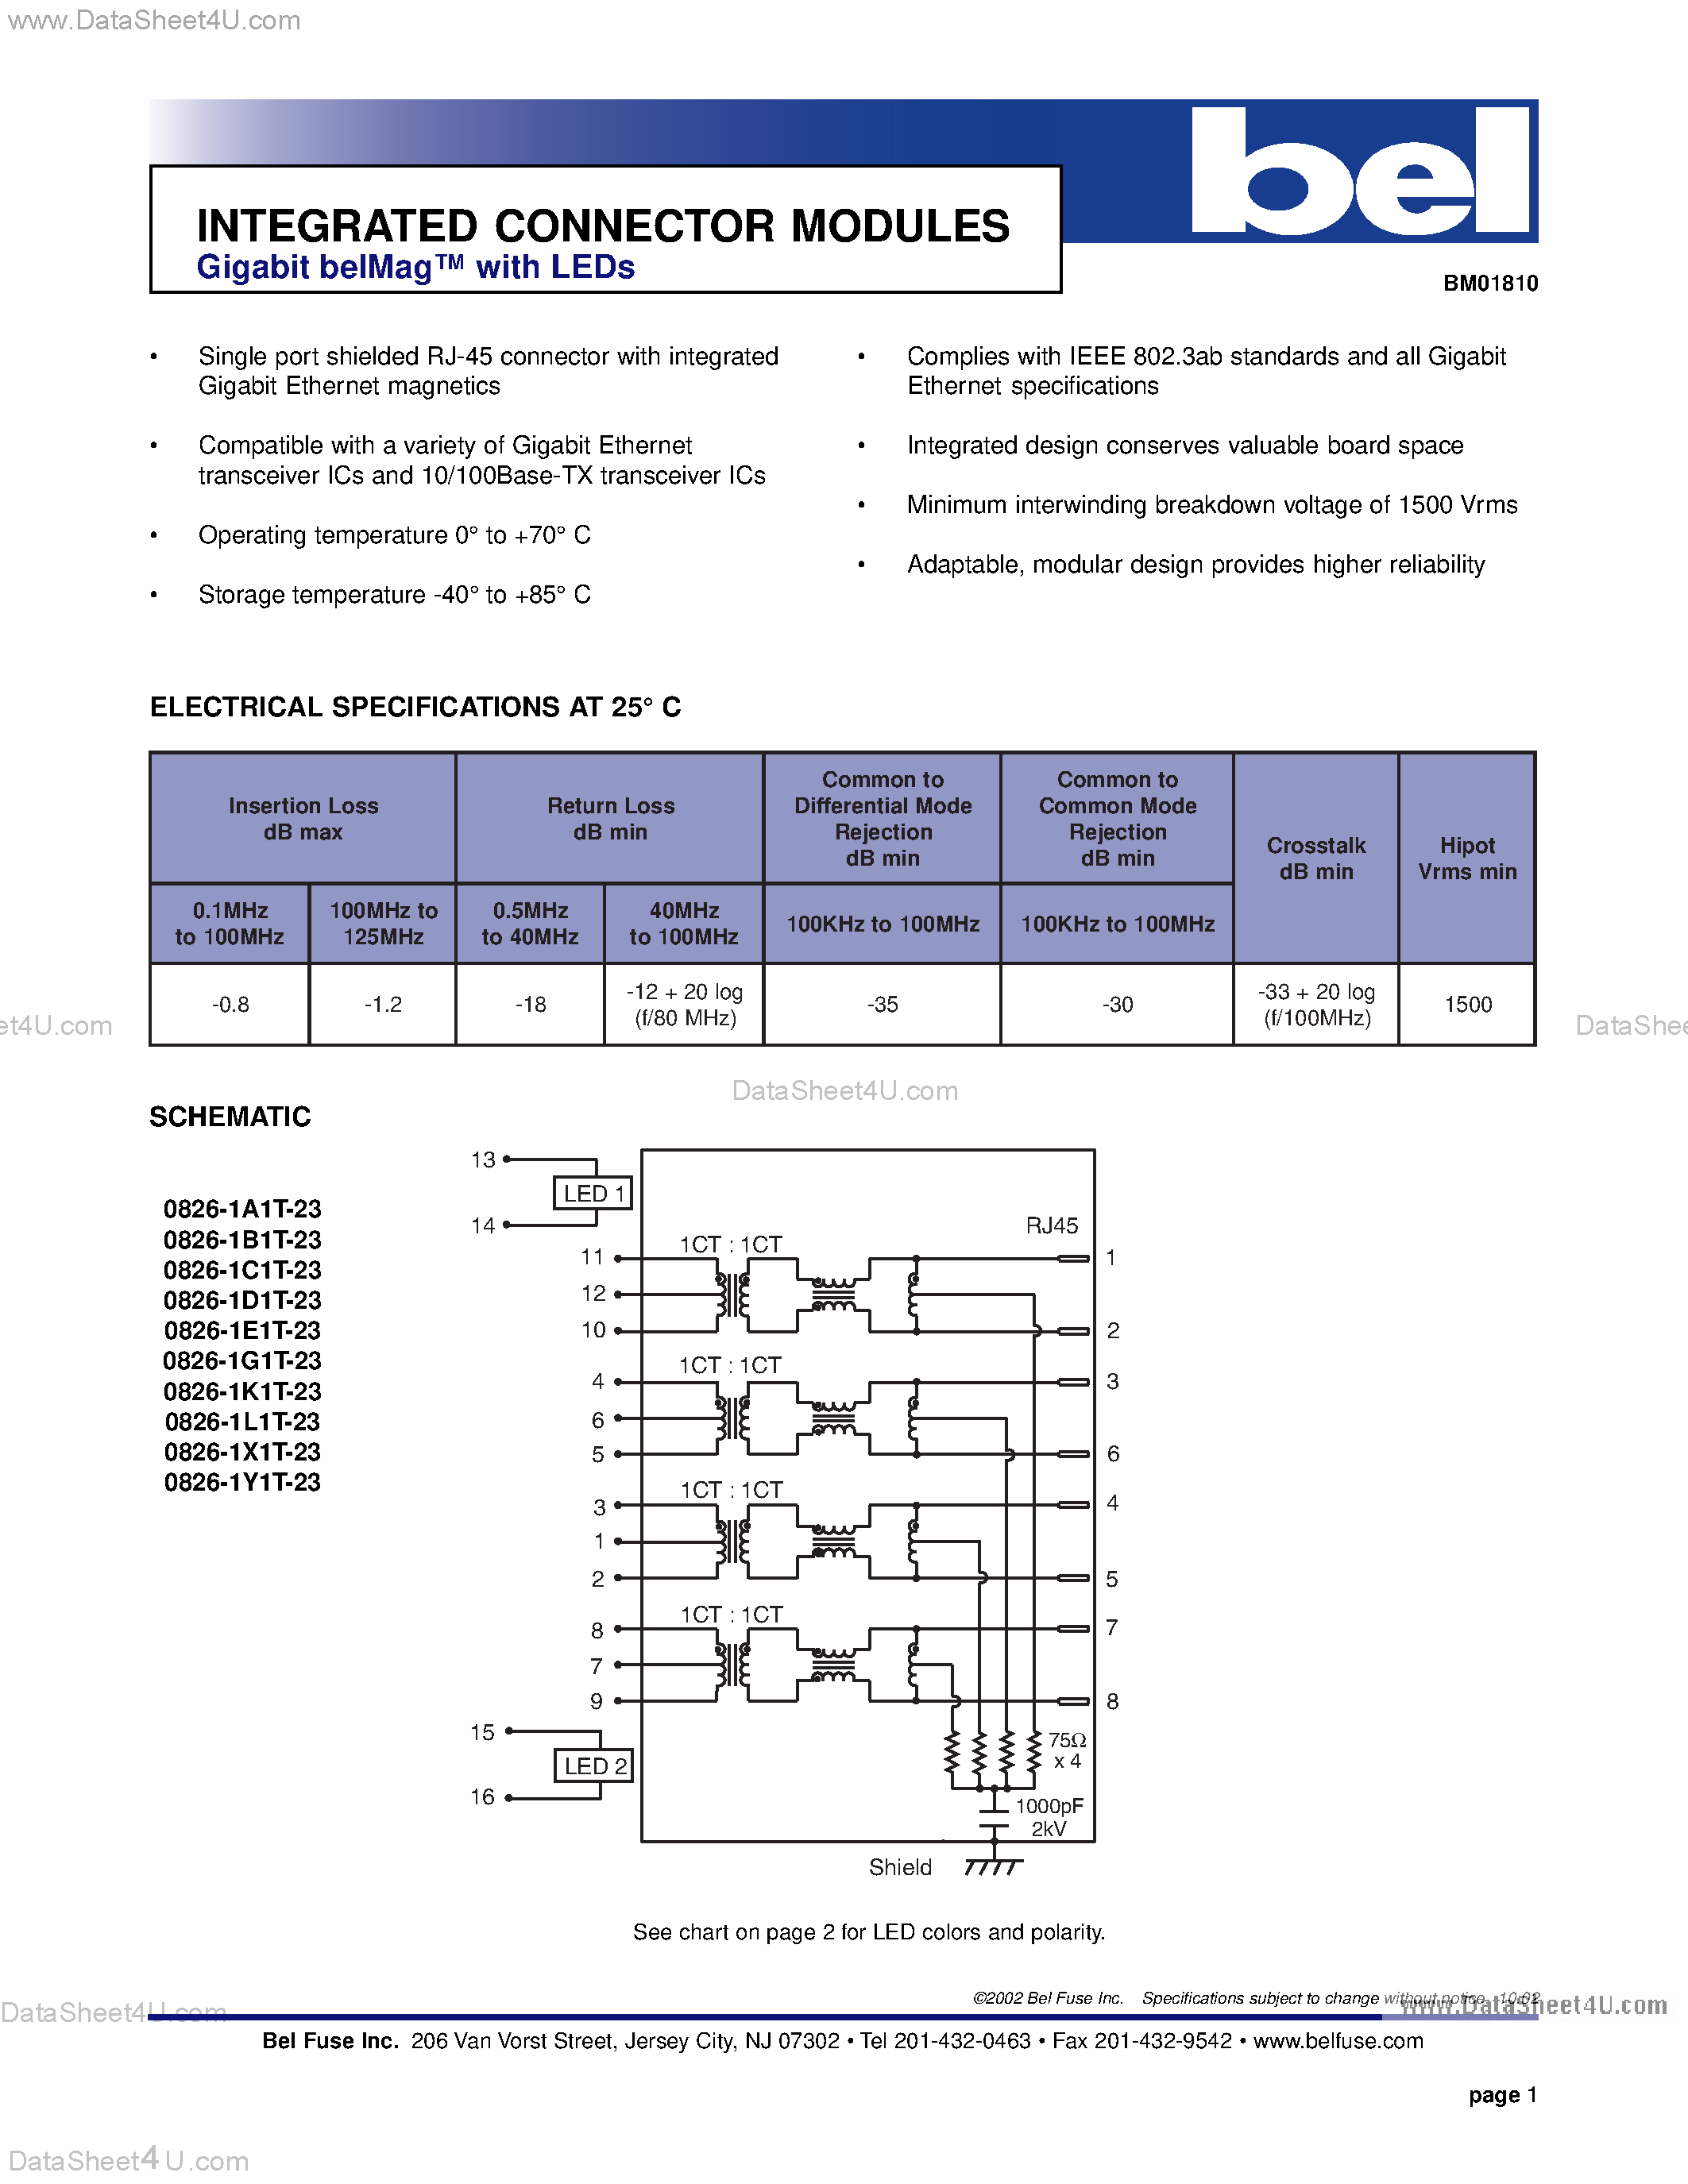 Datasheet 0826-1X1T-23 - (0826-xxxx-23) INTEGRATED CONNECTOR MODULES Gigabit belMag with LEDs page 2